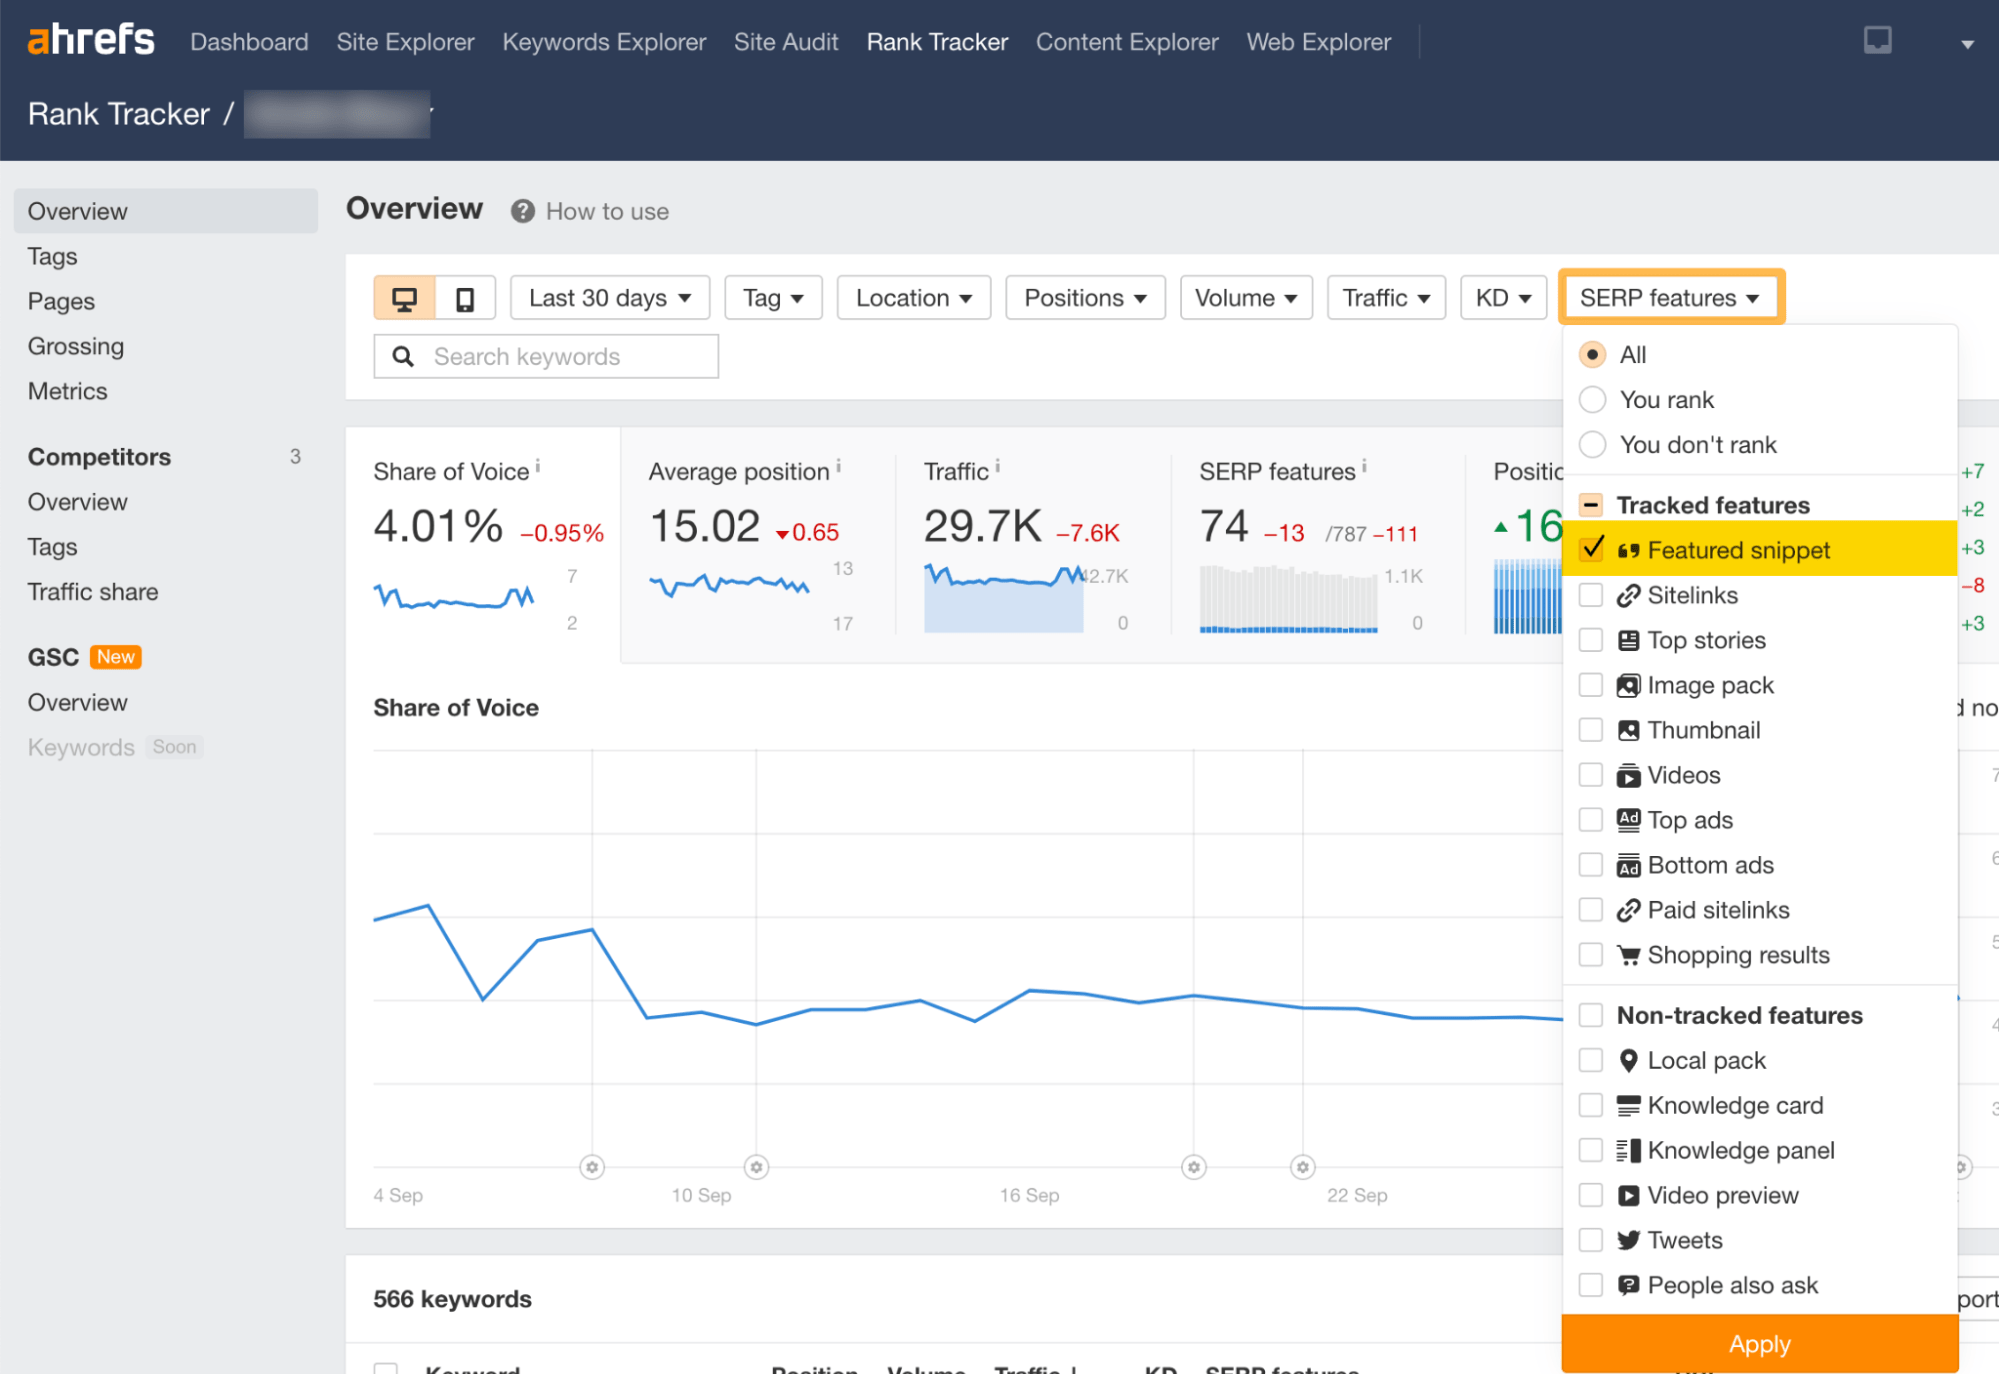 SERP features drop down menu, selecting featured snippets, via Ahrefs' Rank Tracker
